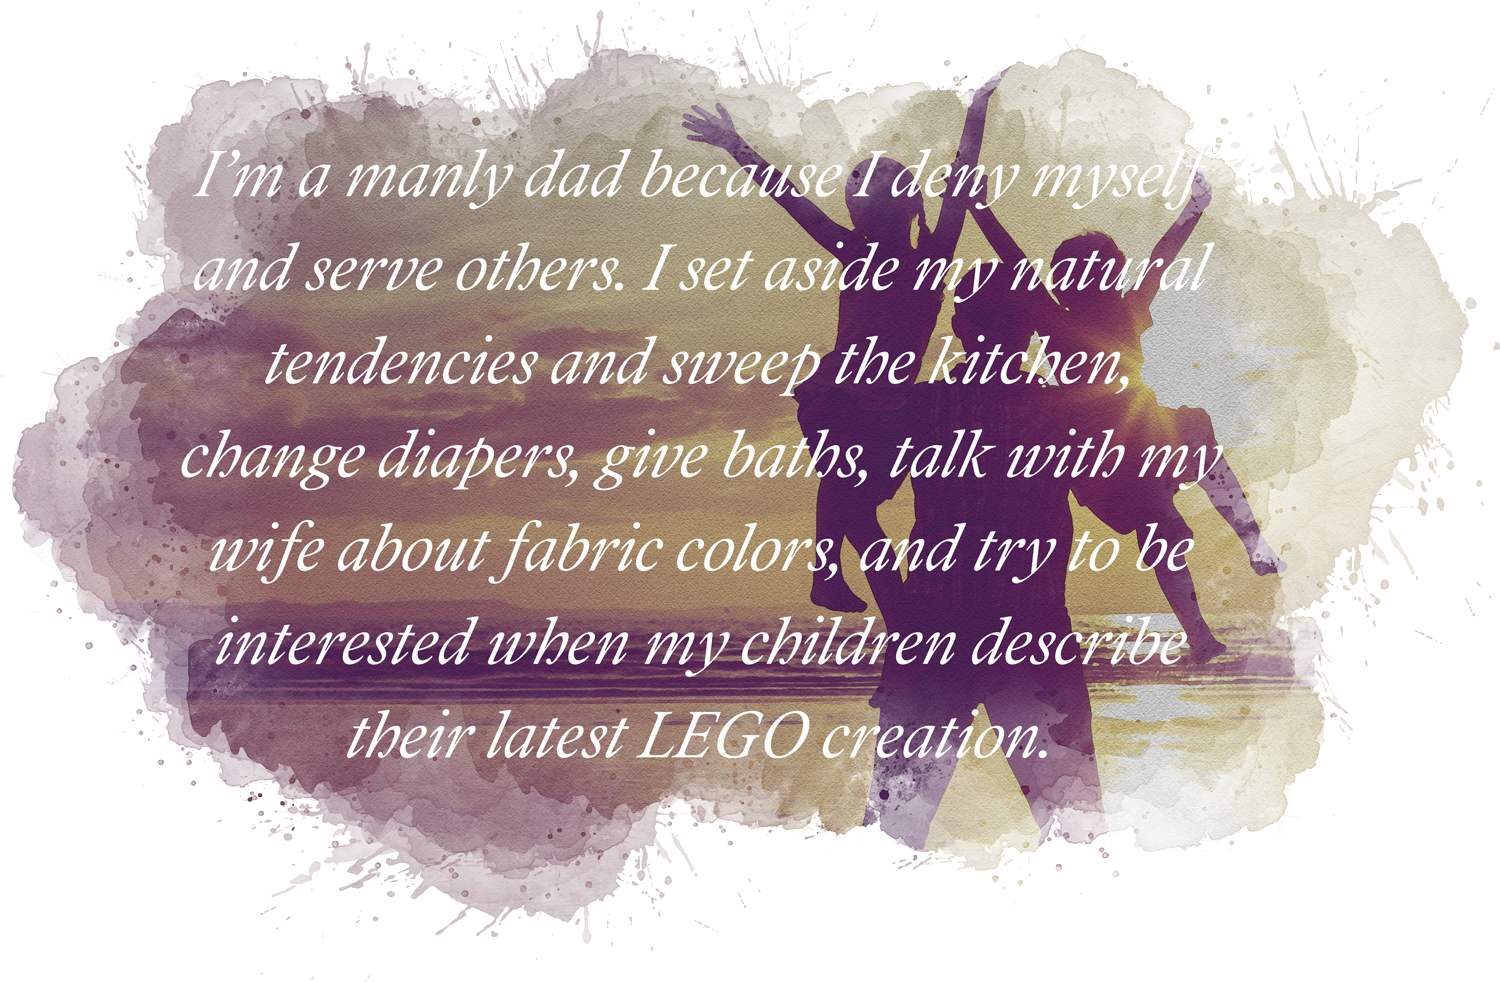 Quoting the article, "I’m a manly dad because I deny myself and serve others. I set aside my natural tendencies and sweep the kitchen, change diapers, give baths, talk with my wife about fabric colors, and try to be interested when my children describe their latest LEGO creation."